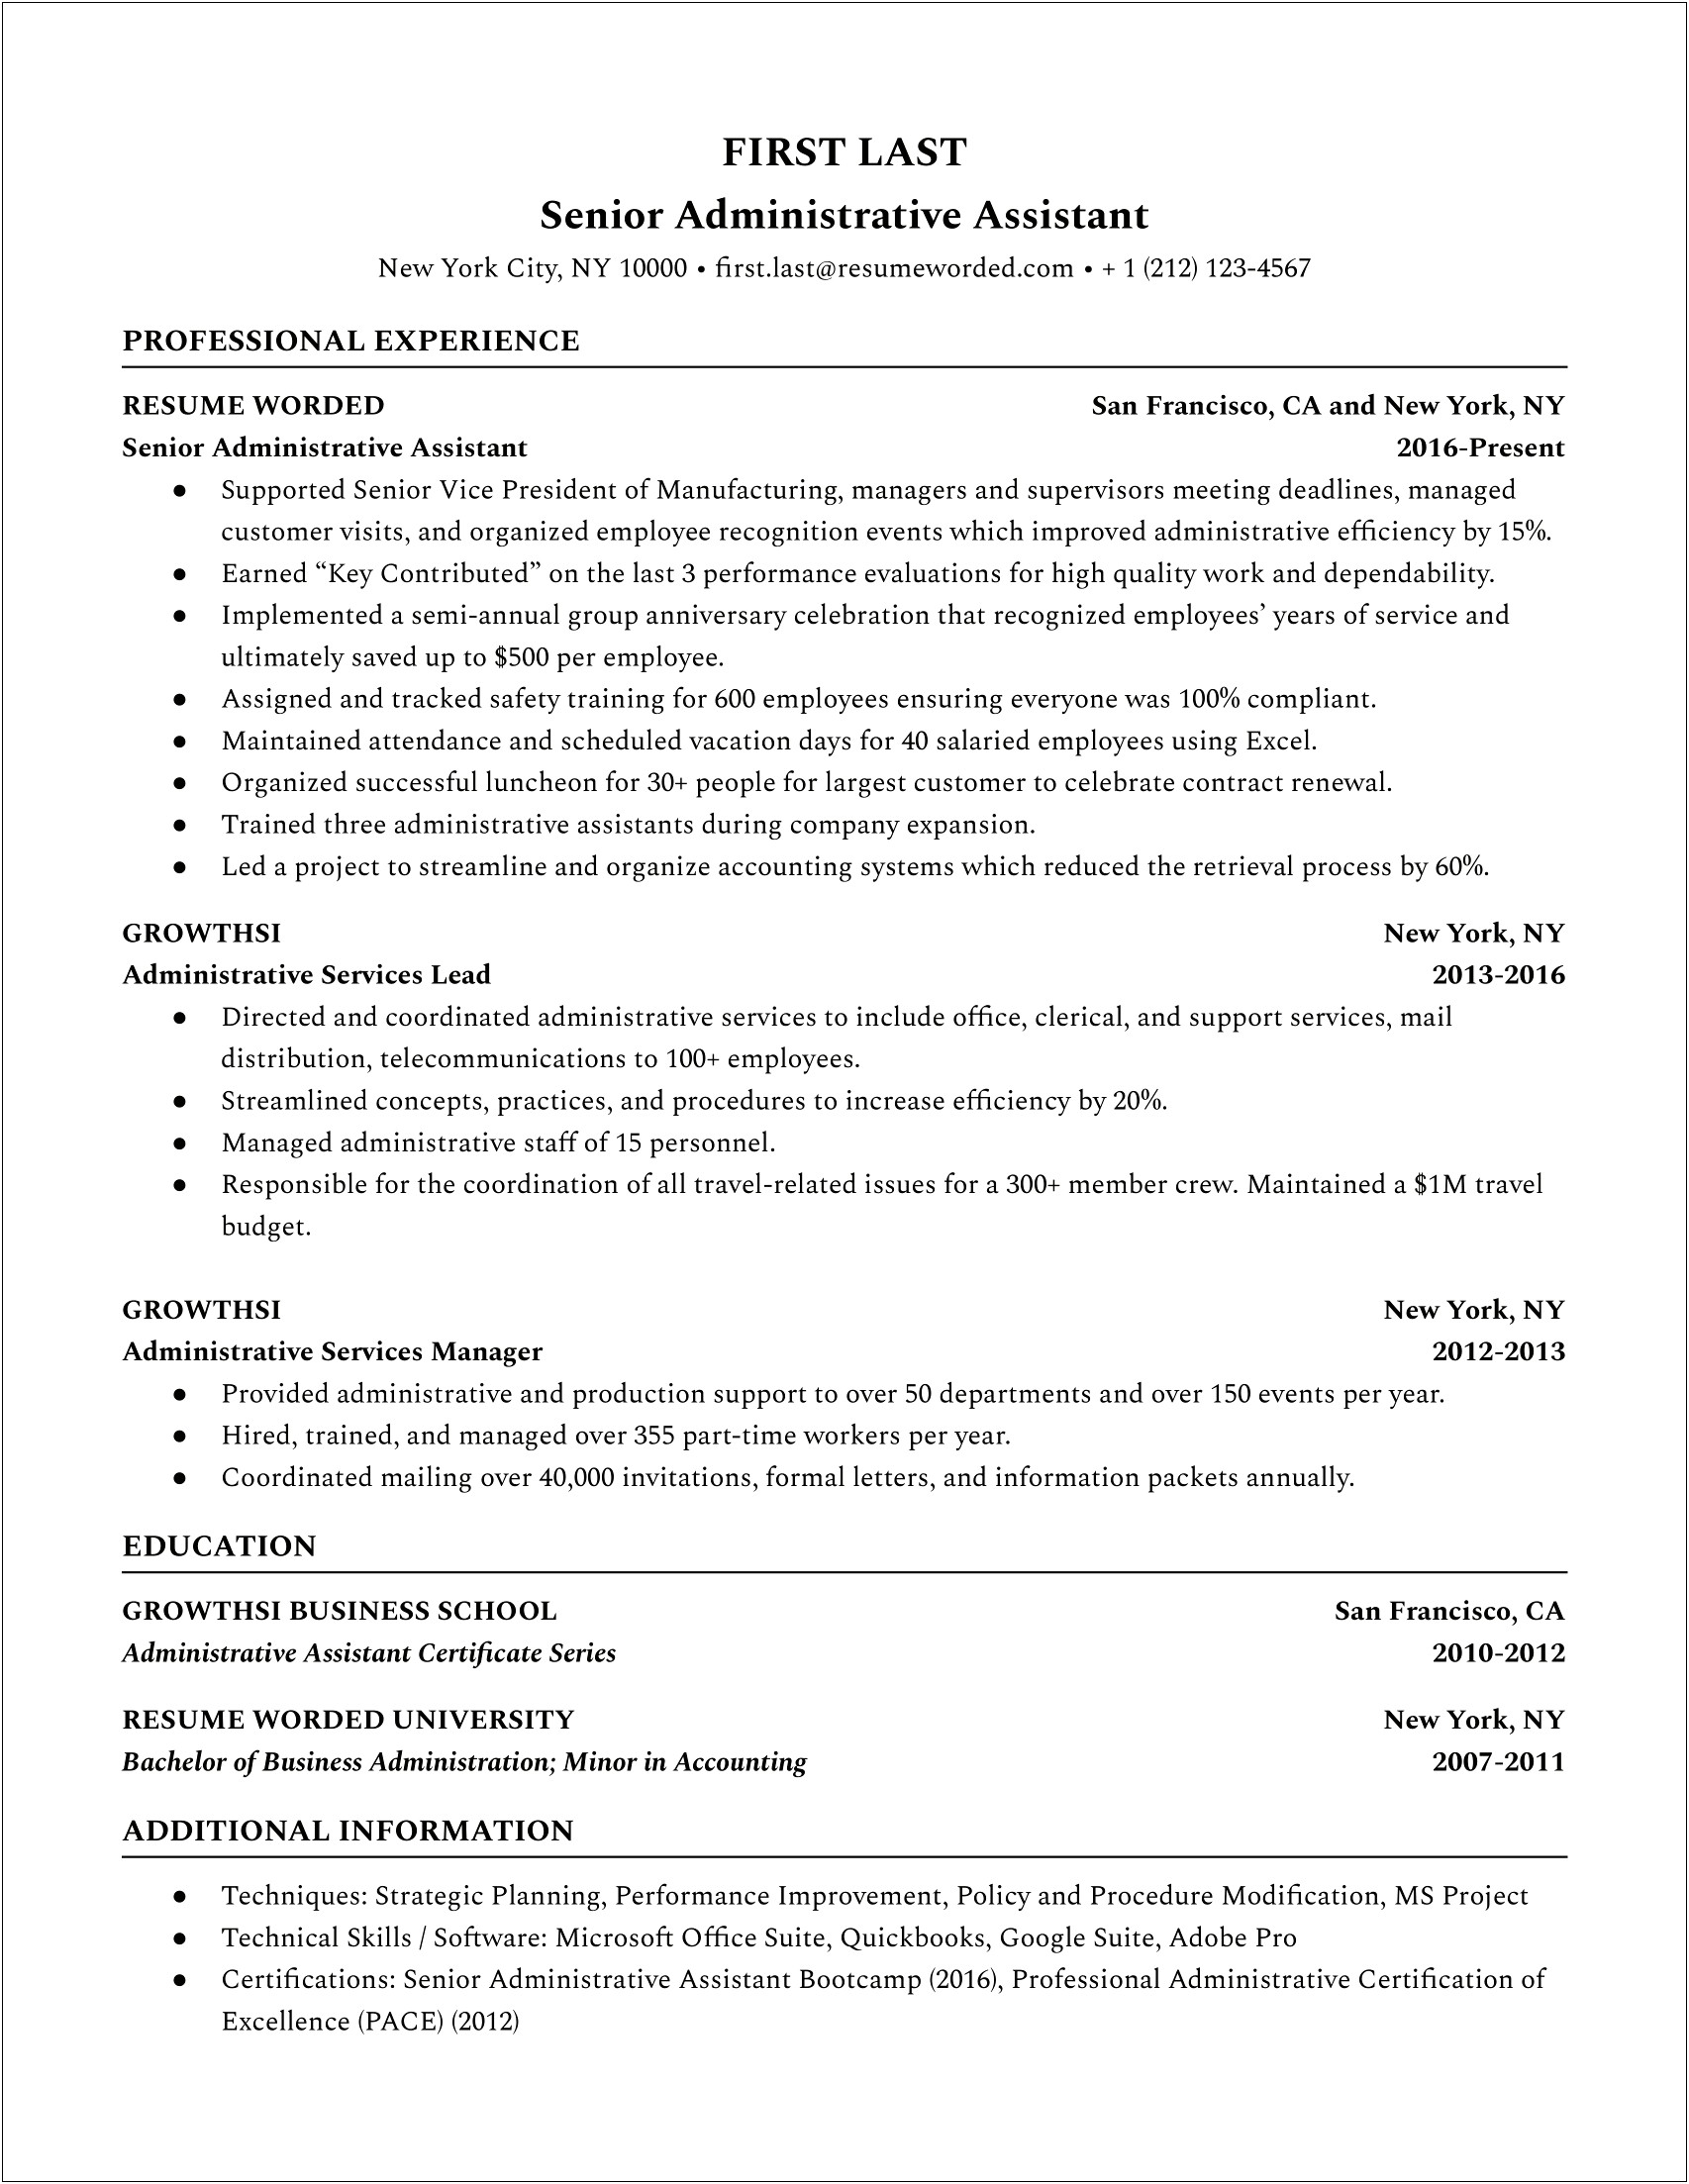 Medical Office Administrative Assistant Resume Sample